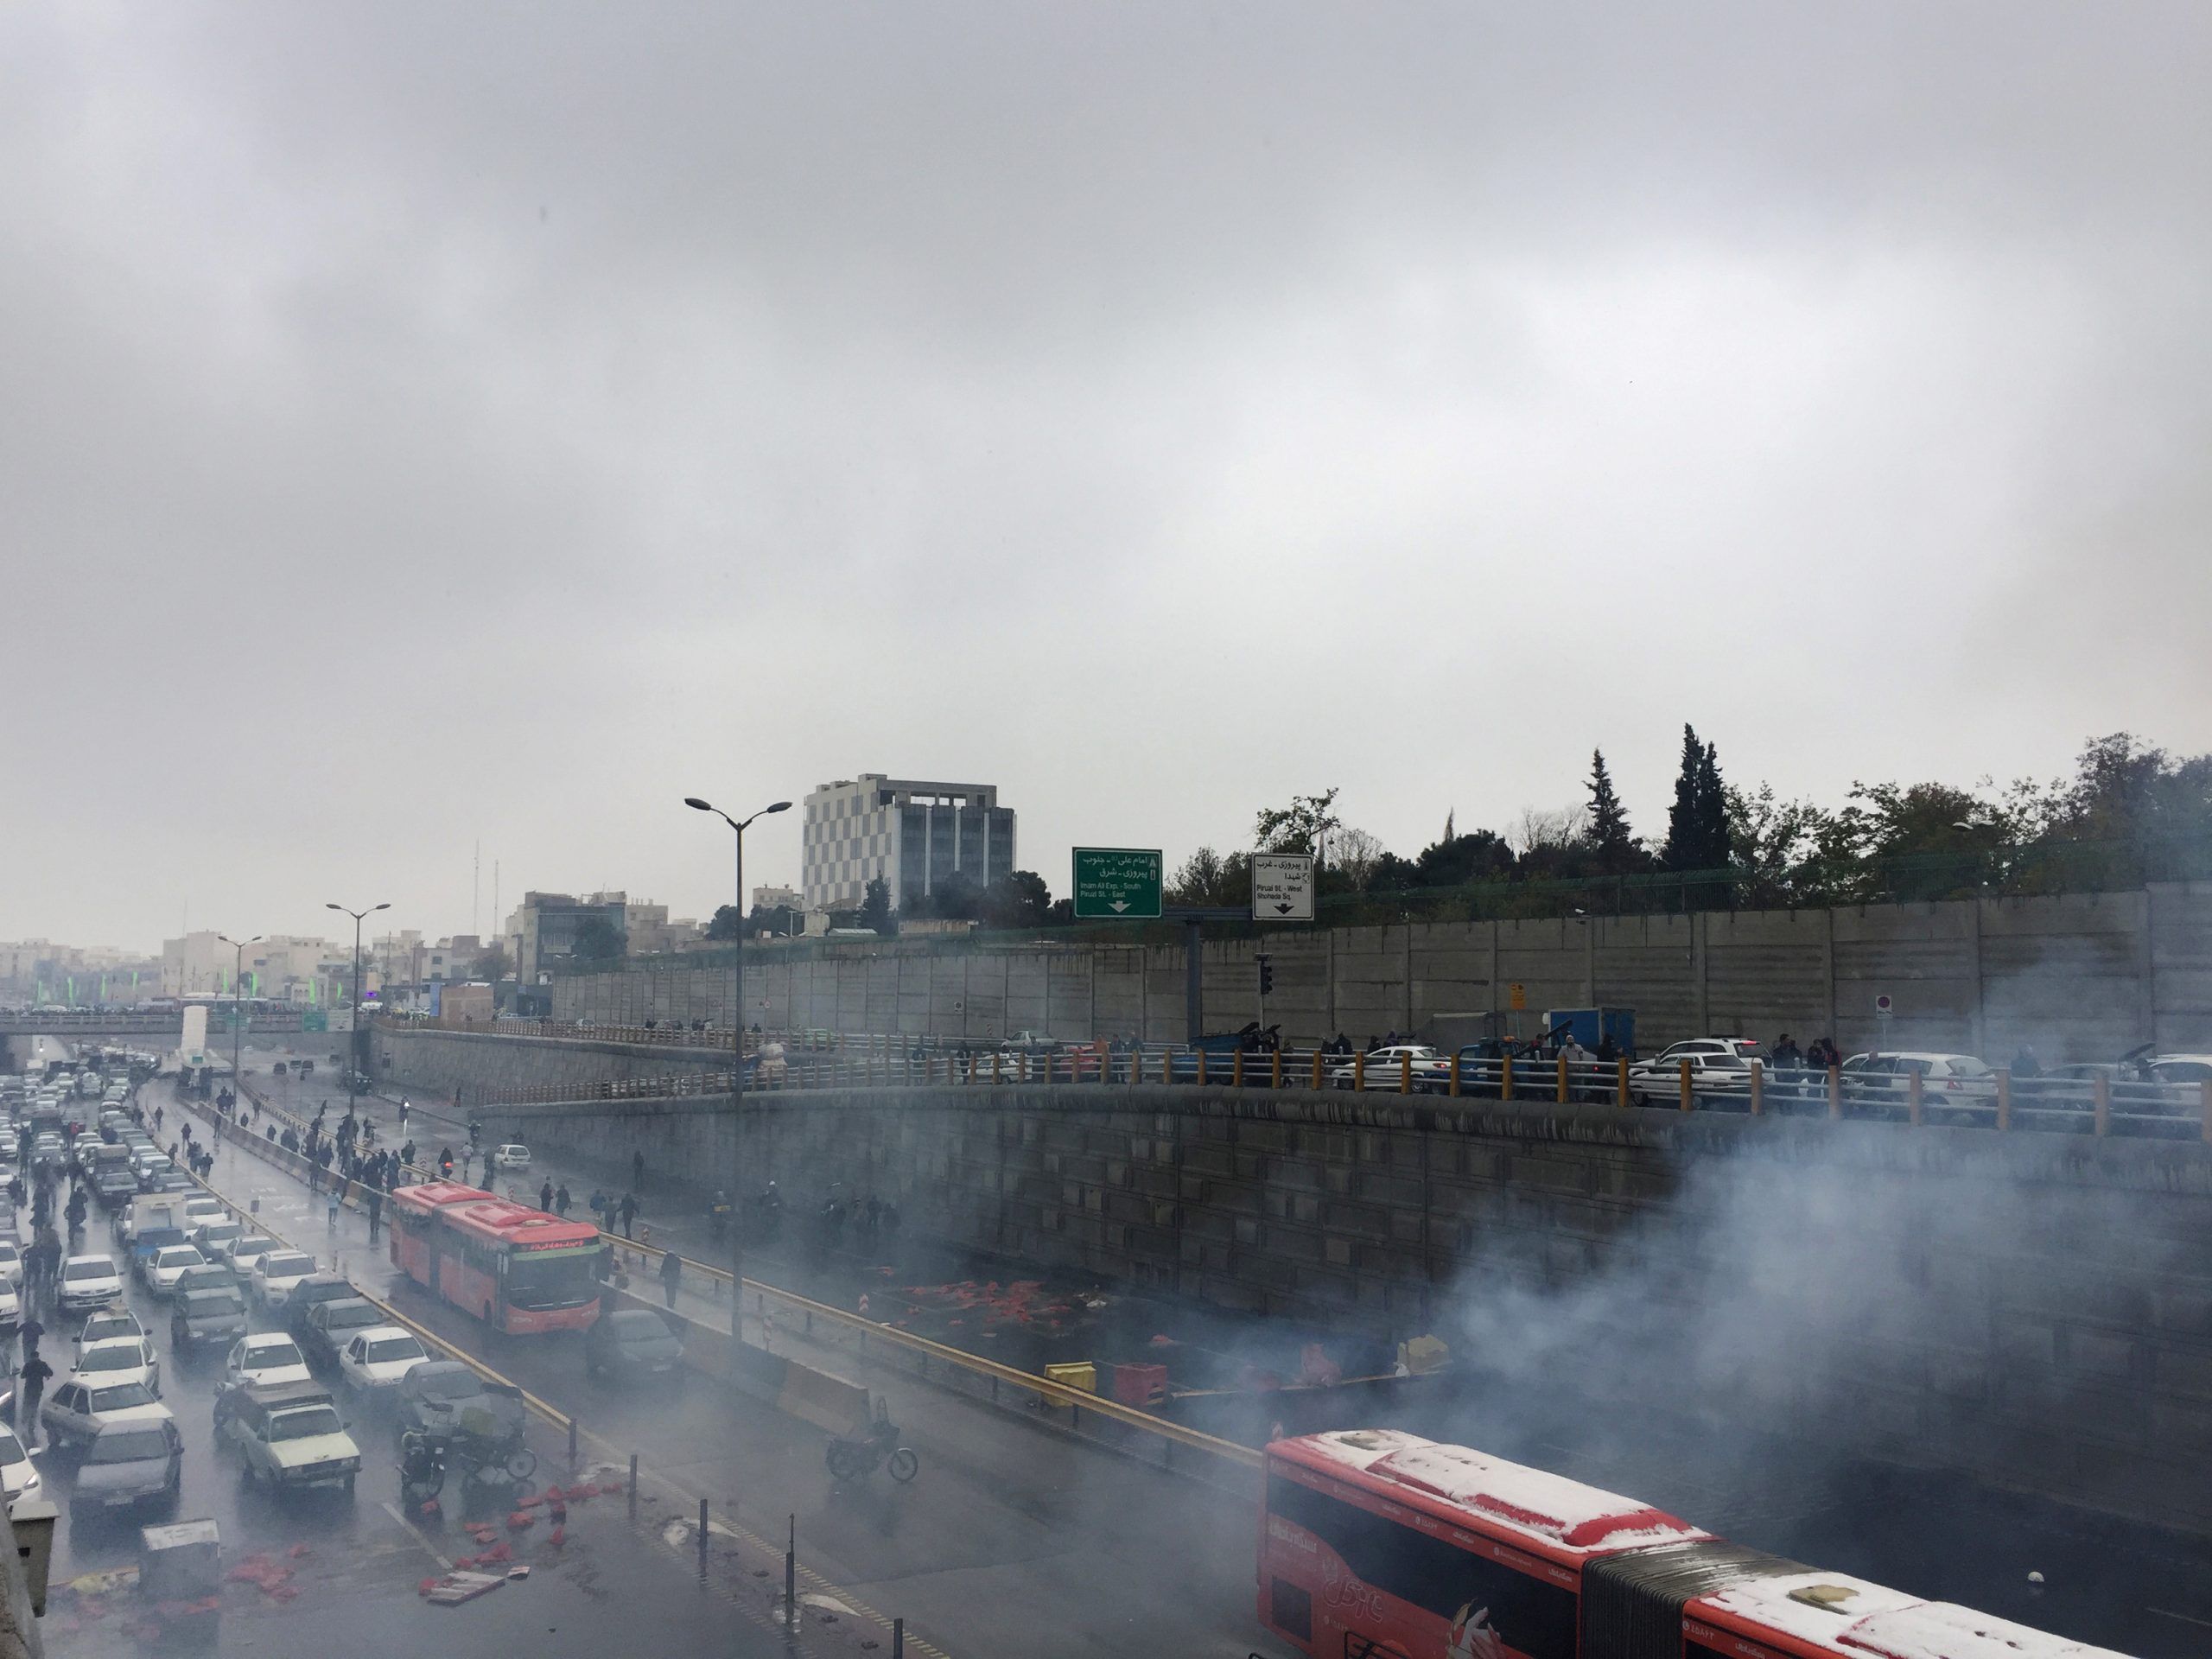 2019-11-16T120810Z_490587897_RC2CCD9M5DY3_RTRMADP_3_IRAN-FUEL-PROTESTS-scaled